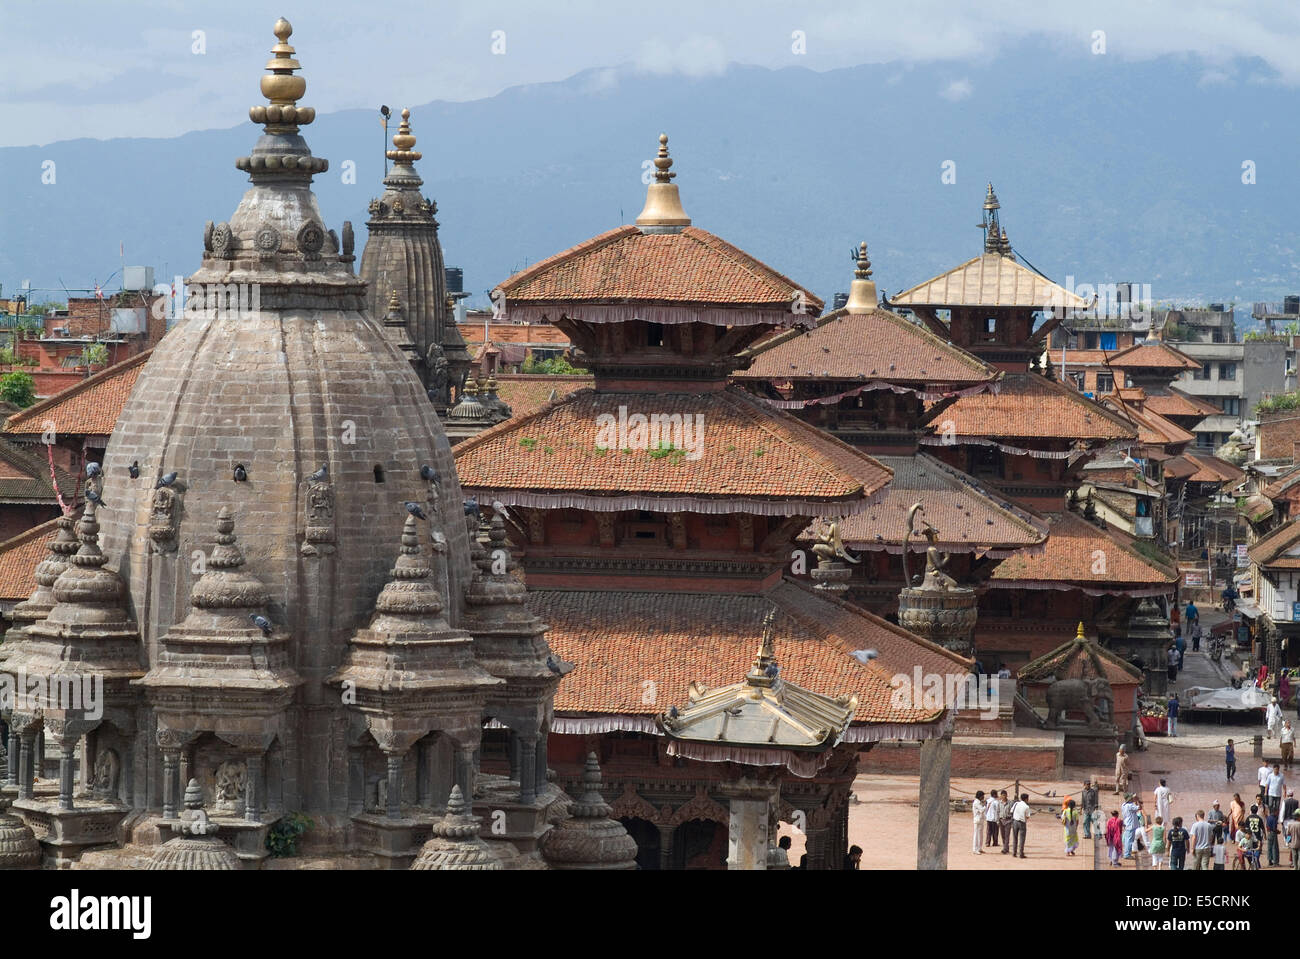 View over the temple complex, Durbar Square, Patan, Nepal Stock Photo